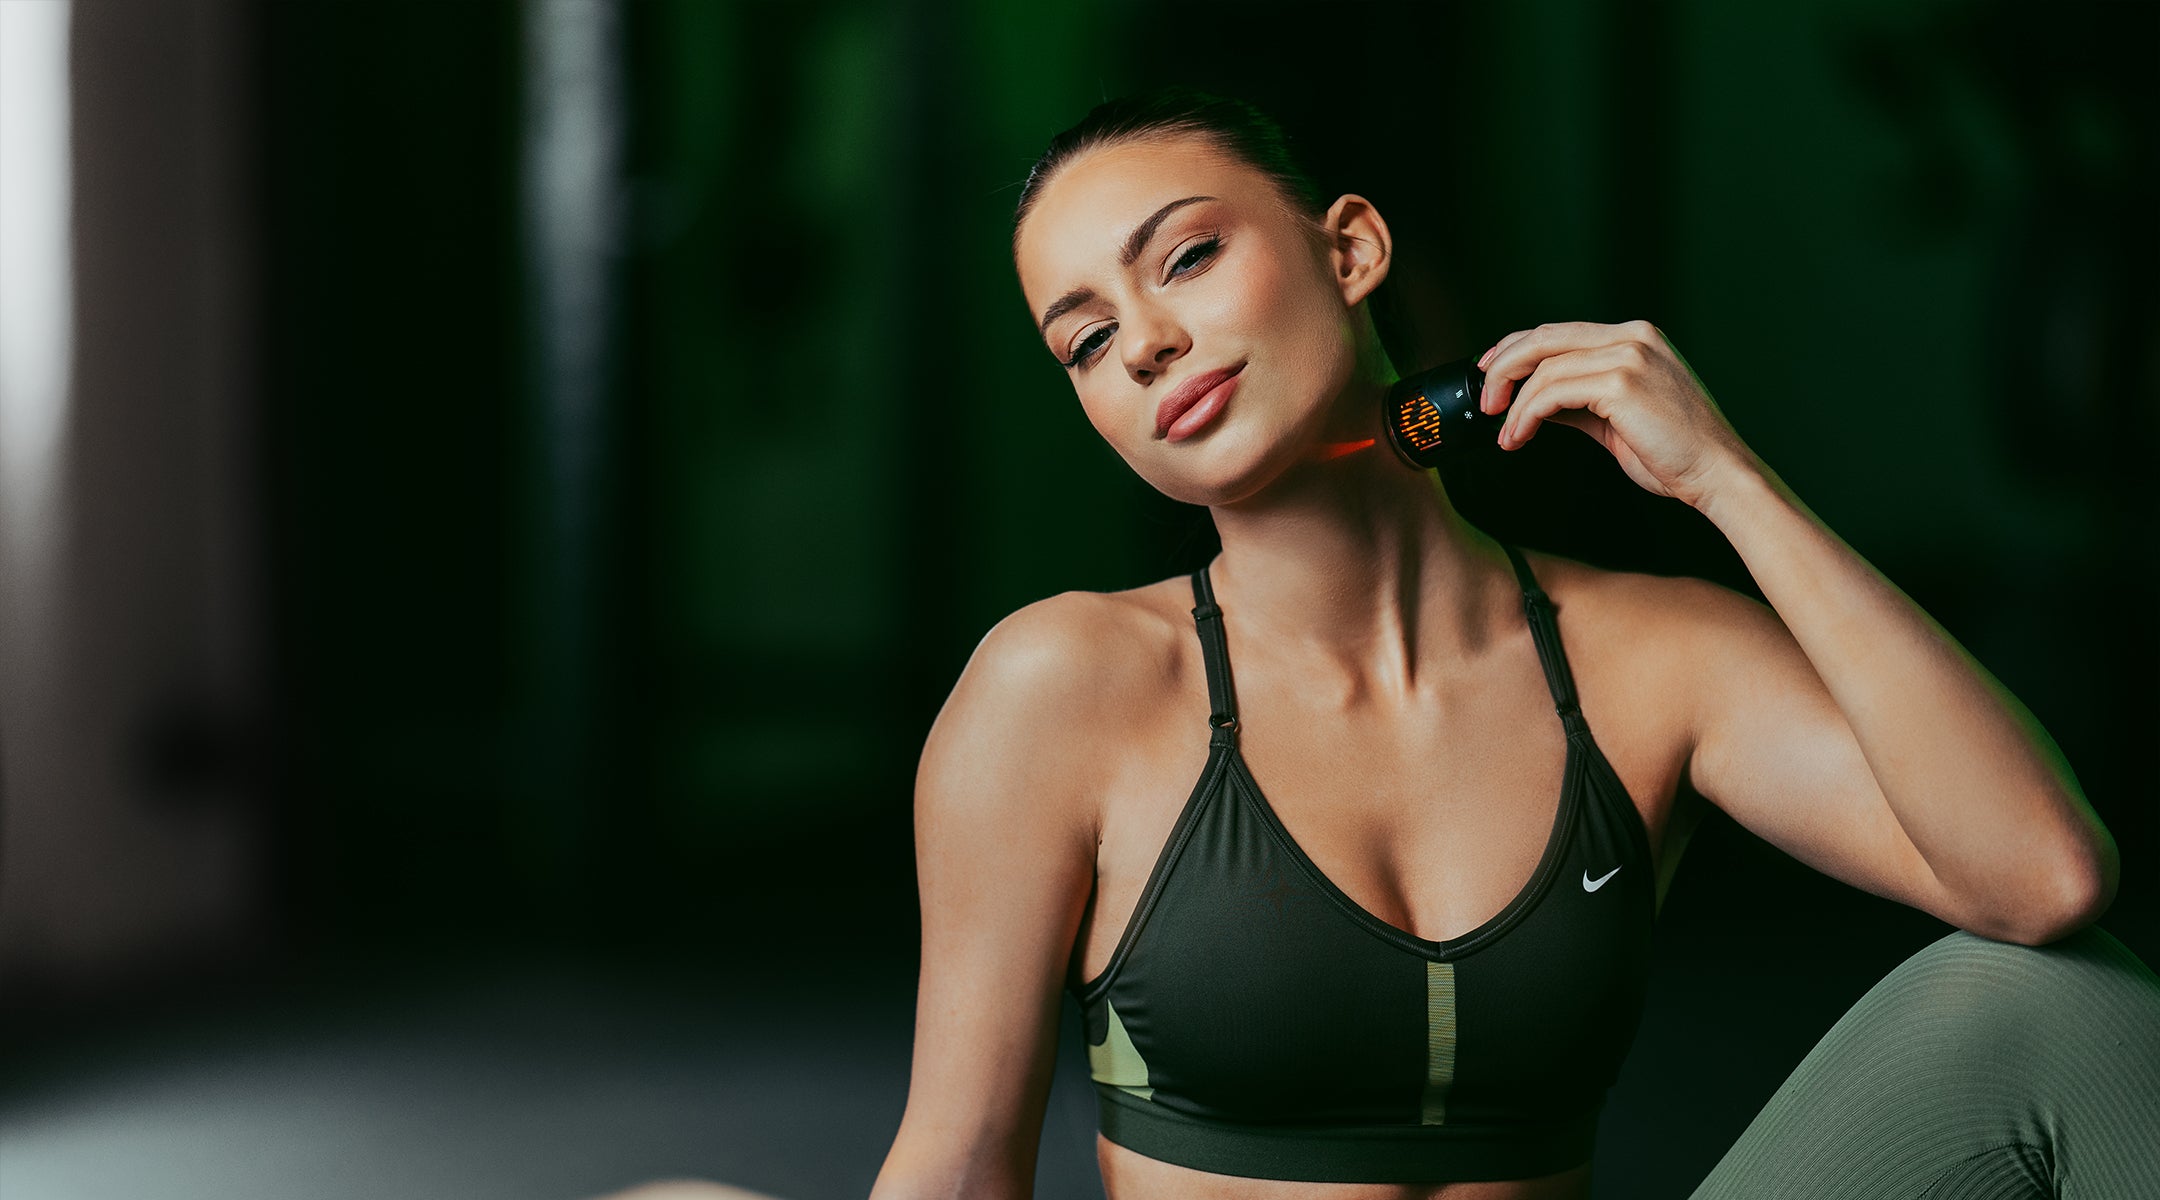 woman at gym using hot and cold attachment on neck to relax muscles